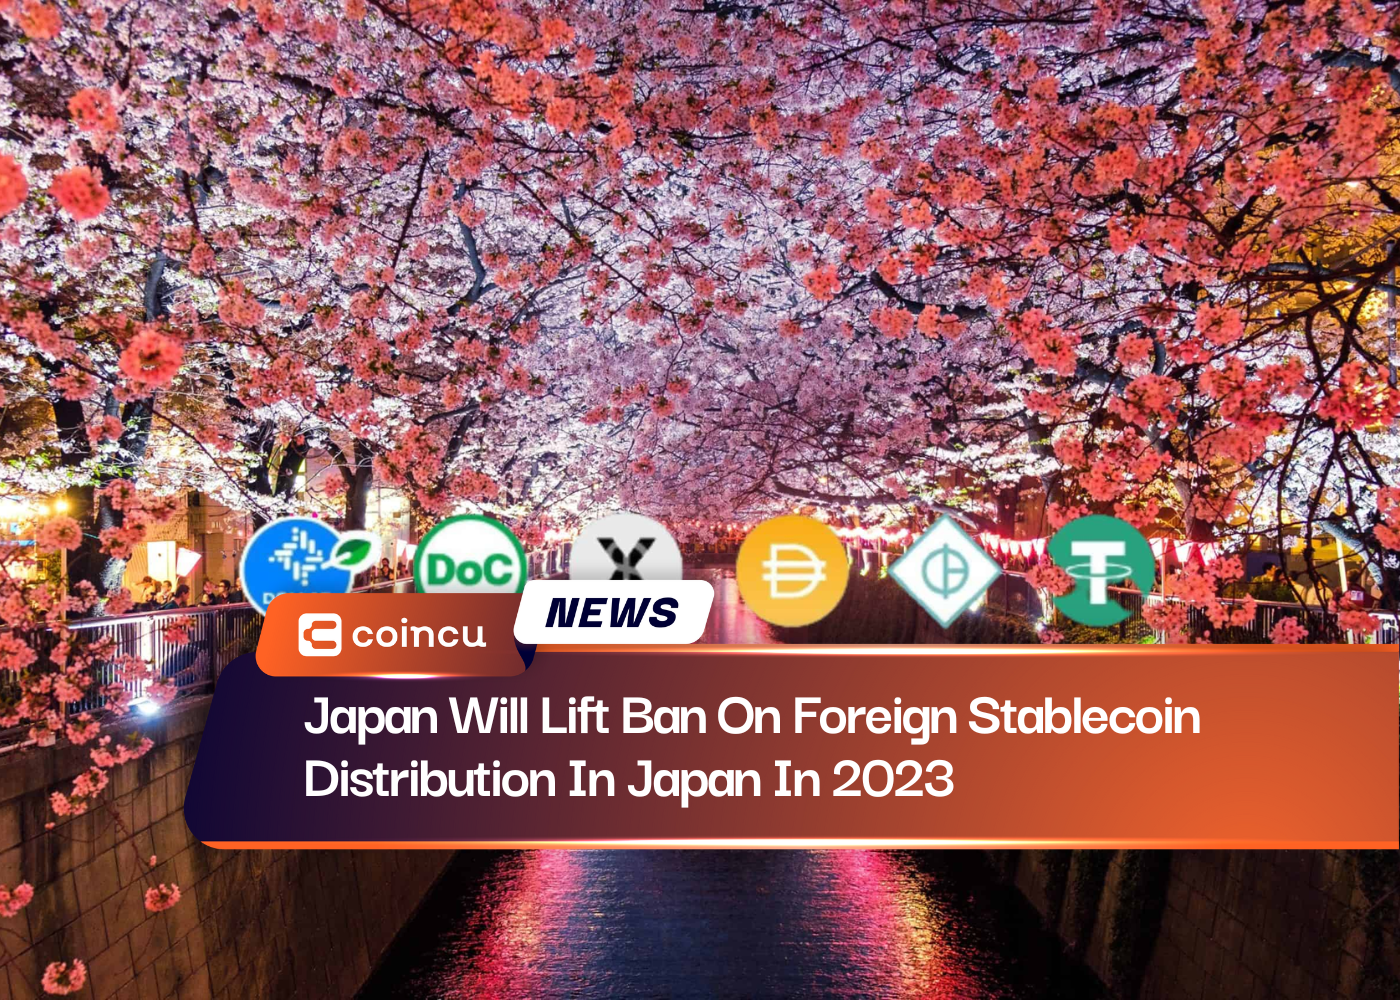 Japan Will Lift Ban On Foreign Stablecoin Distribution In Japan In 2023